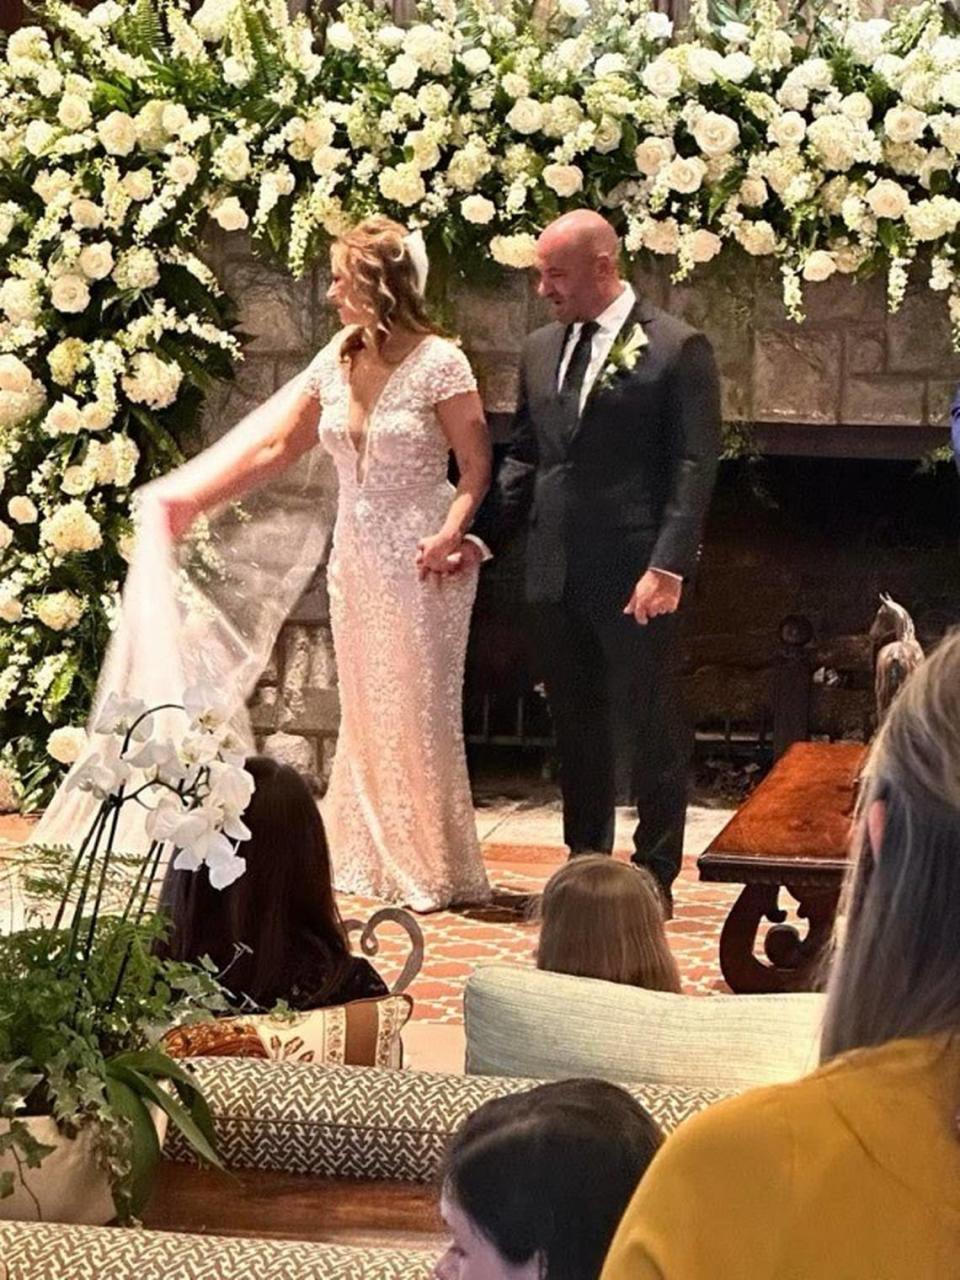 Former WLEX news anchor and Miss Kentucky Nancy Cox married Justin Galli in a ceremony at Keeneland on May 25.